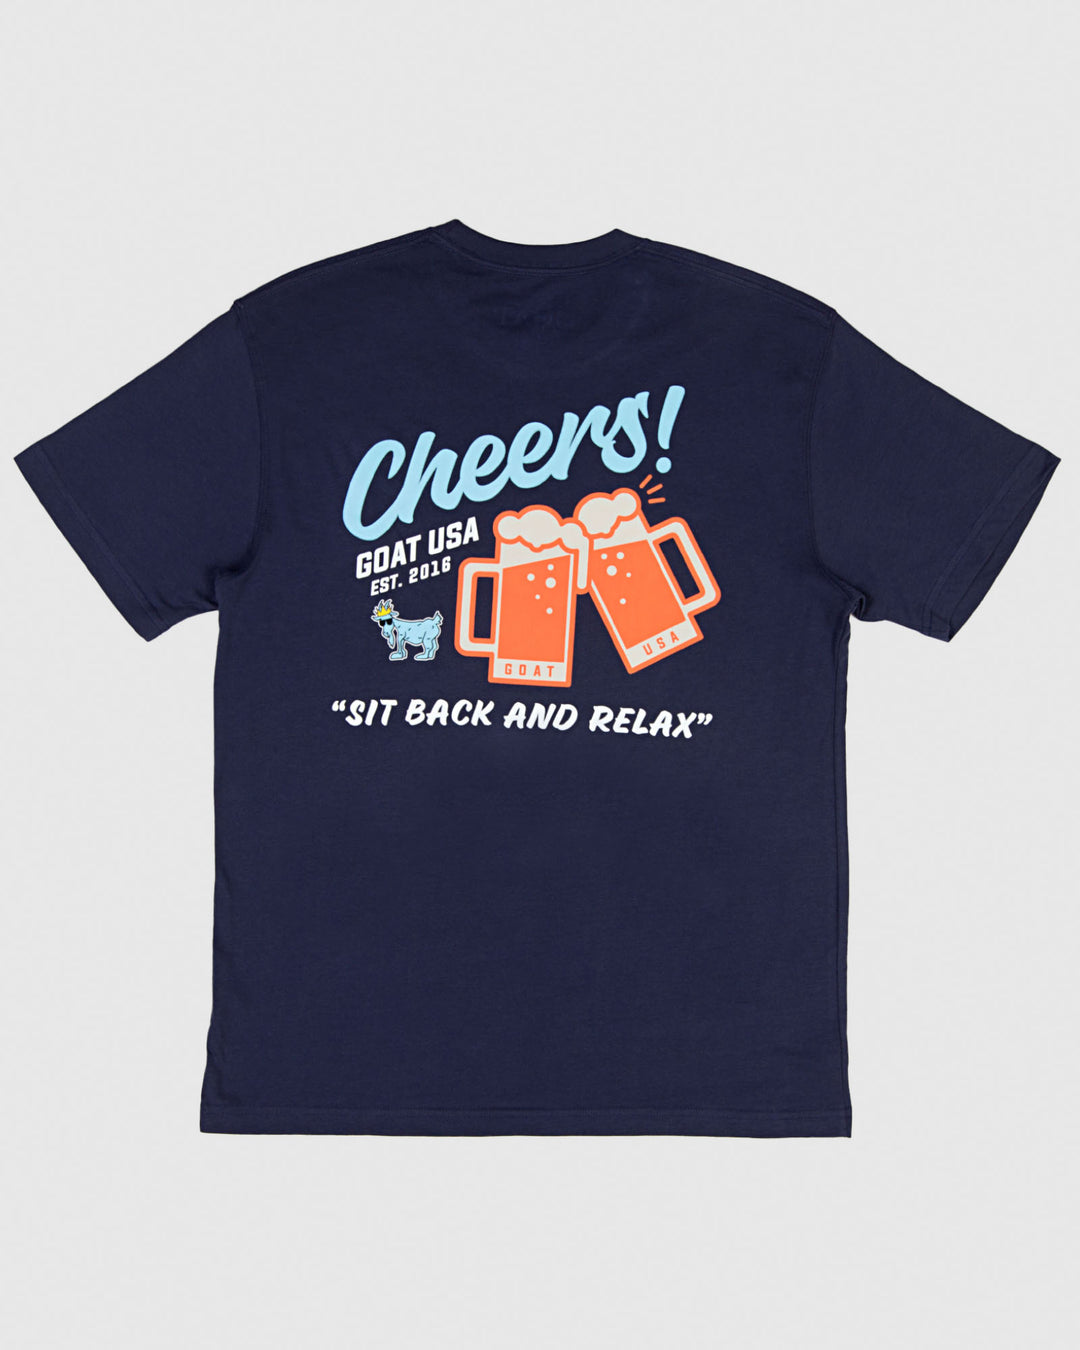 Back of navy t-shirt with two mugs "cheersing"